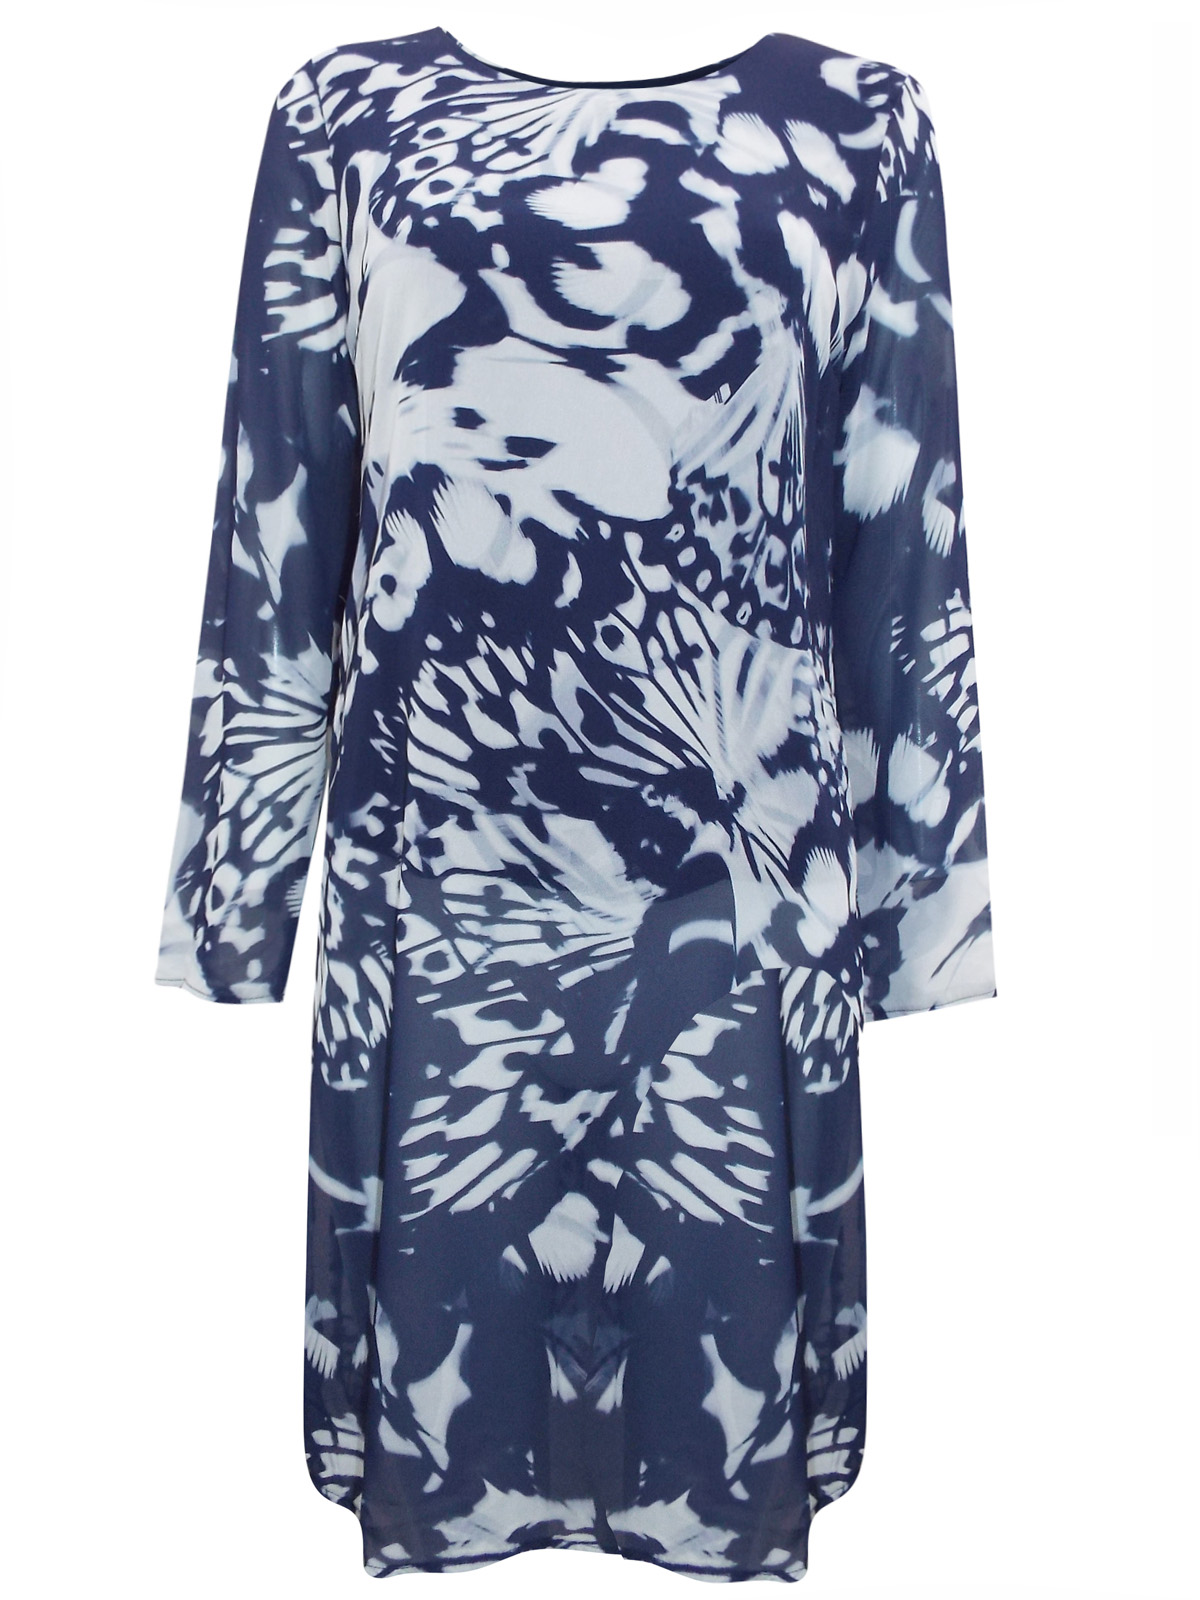 First Avenue NAVY Printed Split Side Tunic - Size 10 to 20